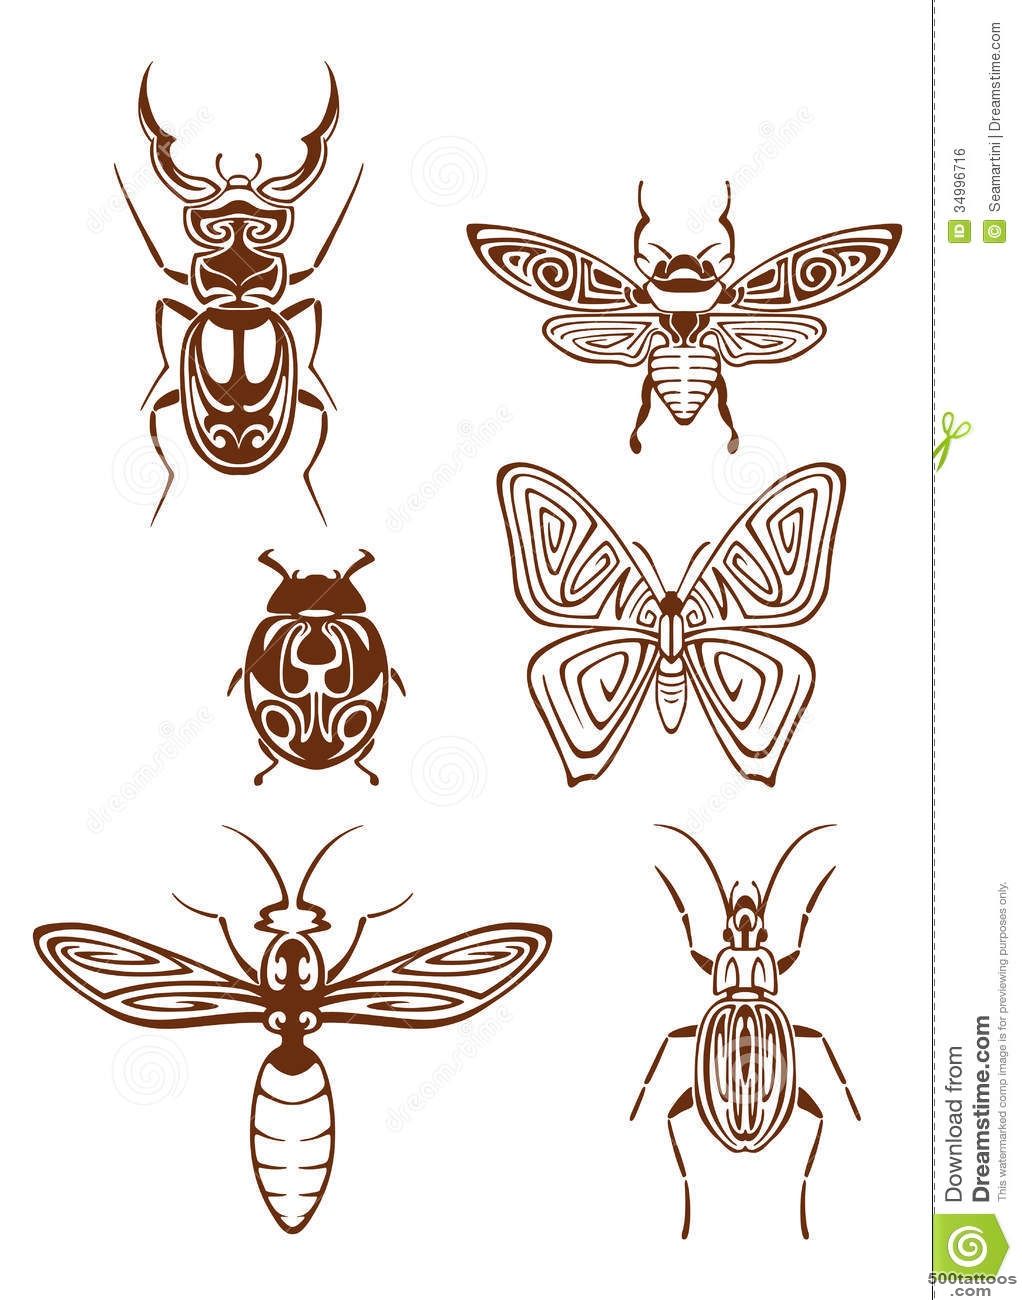 Insects Tattoos In Tribal Style Royalty Free Stock Image   Image ..._17